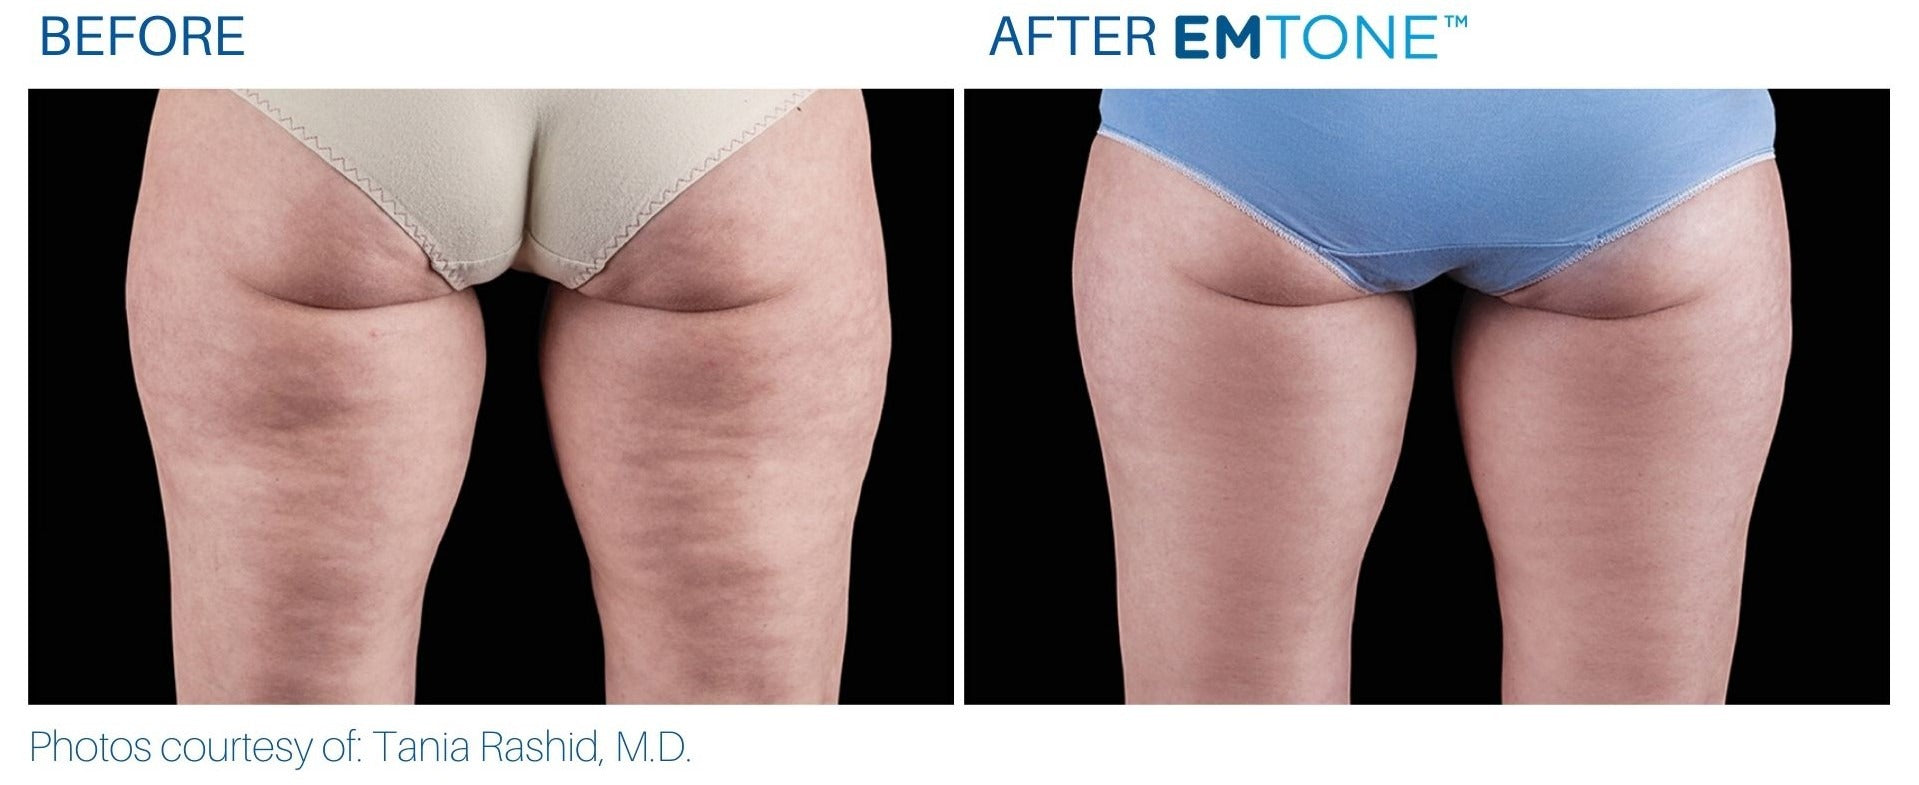 EmTone Course of 5+1 FREE (save €300)